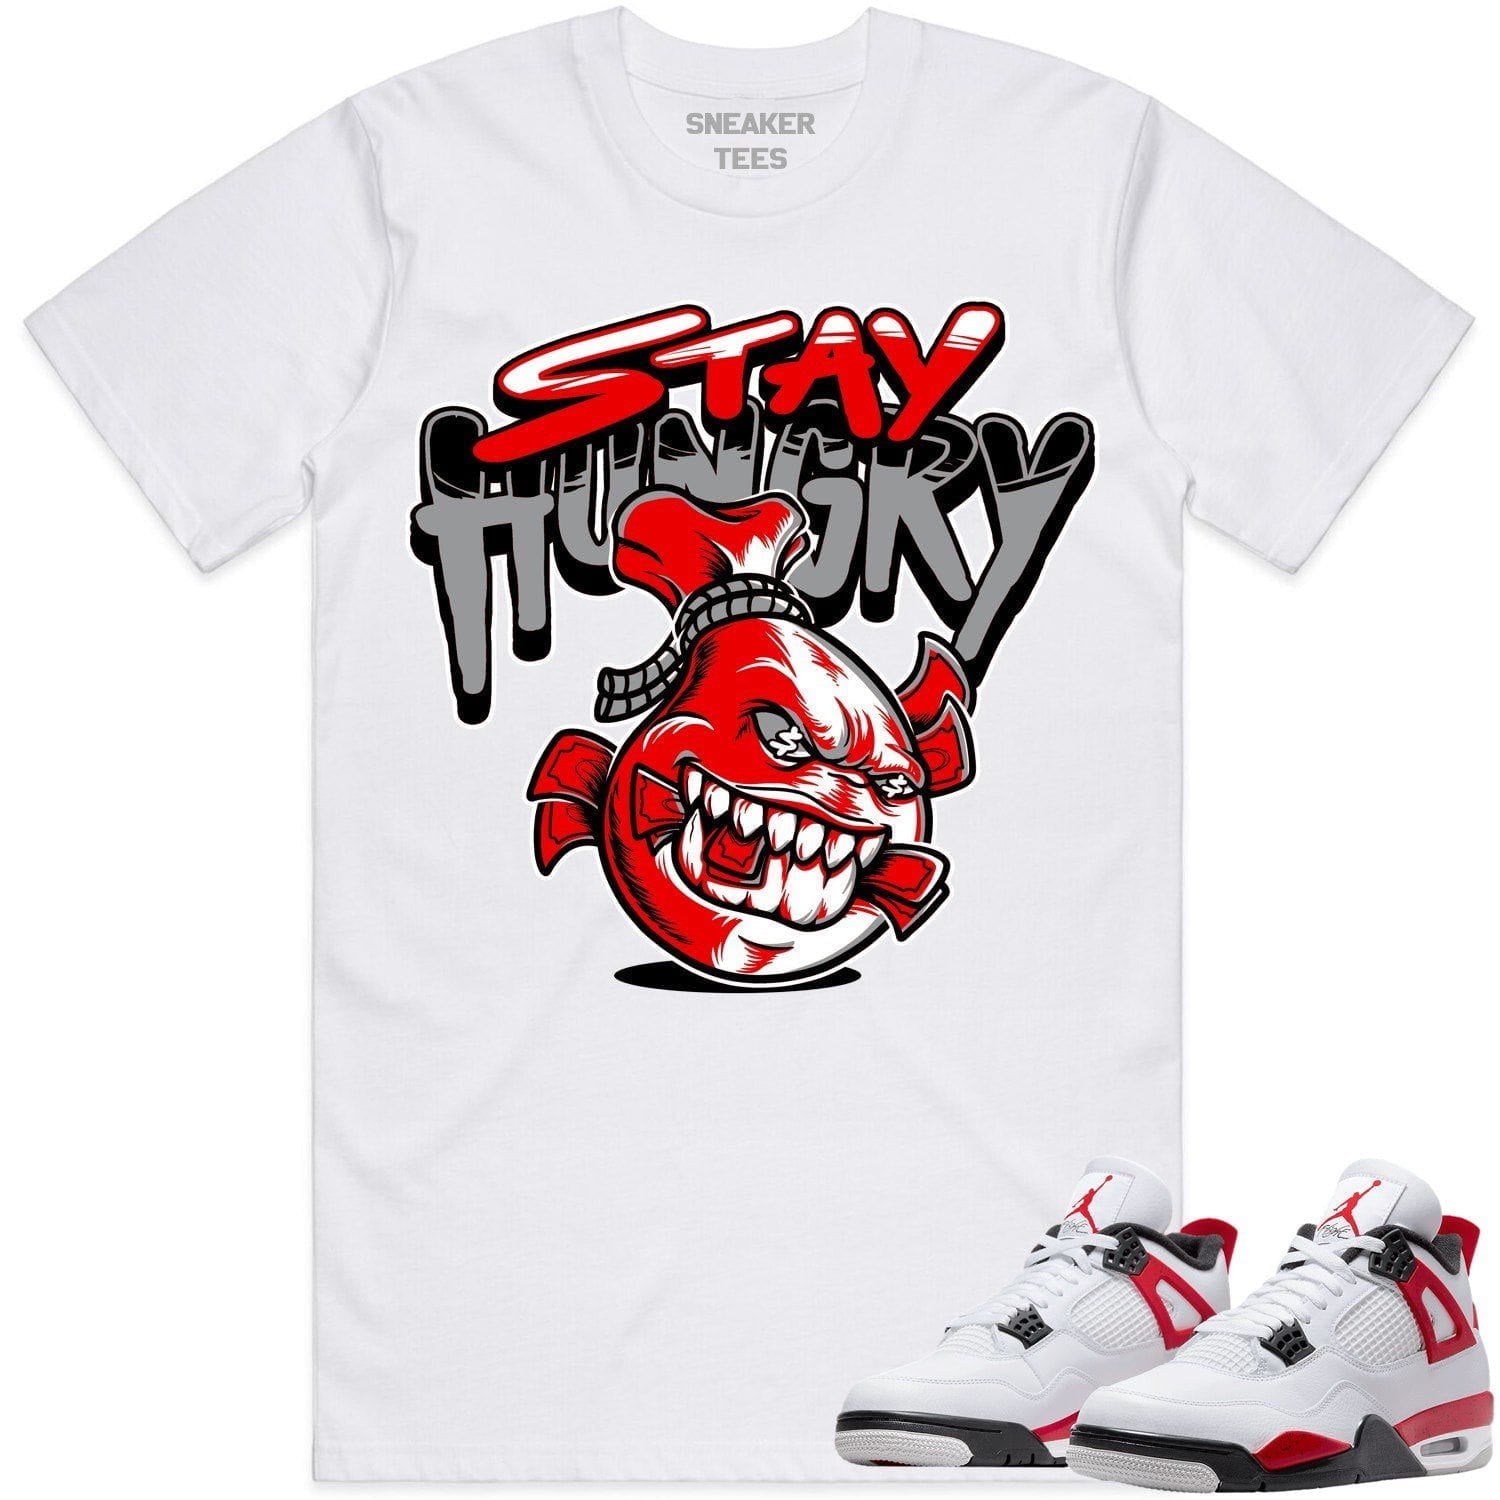 Red Cement 4s Shirt - Jordan Retro 4 Red Cement Shirts - Stay Hungry